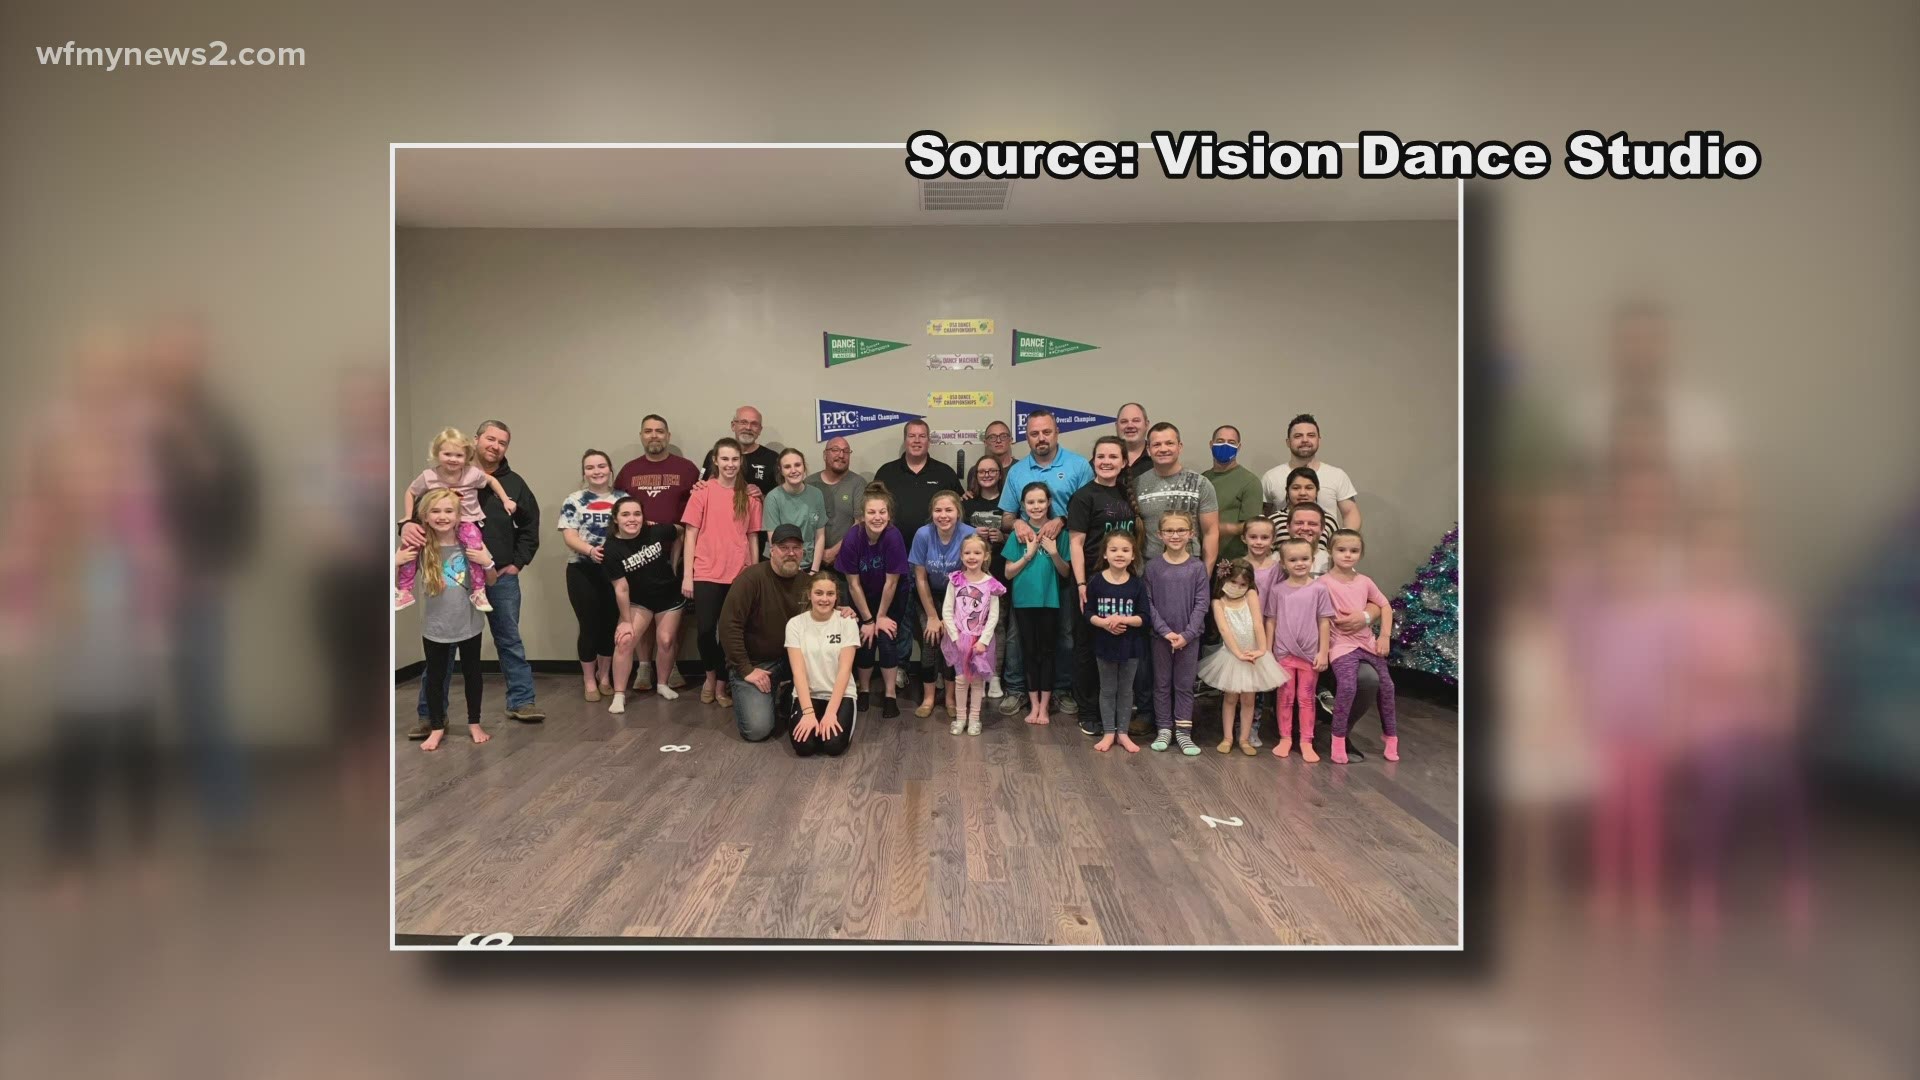 Many of us looked at the beginning of 2021 as a fresh start. For Jenny Hicks and the team at Vision Dance Studio, just a few months ago.